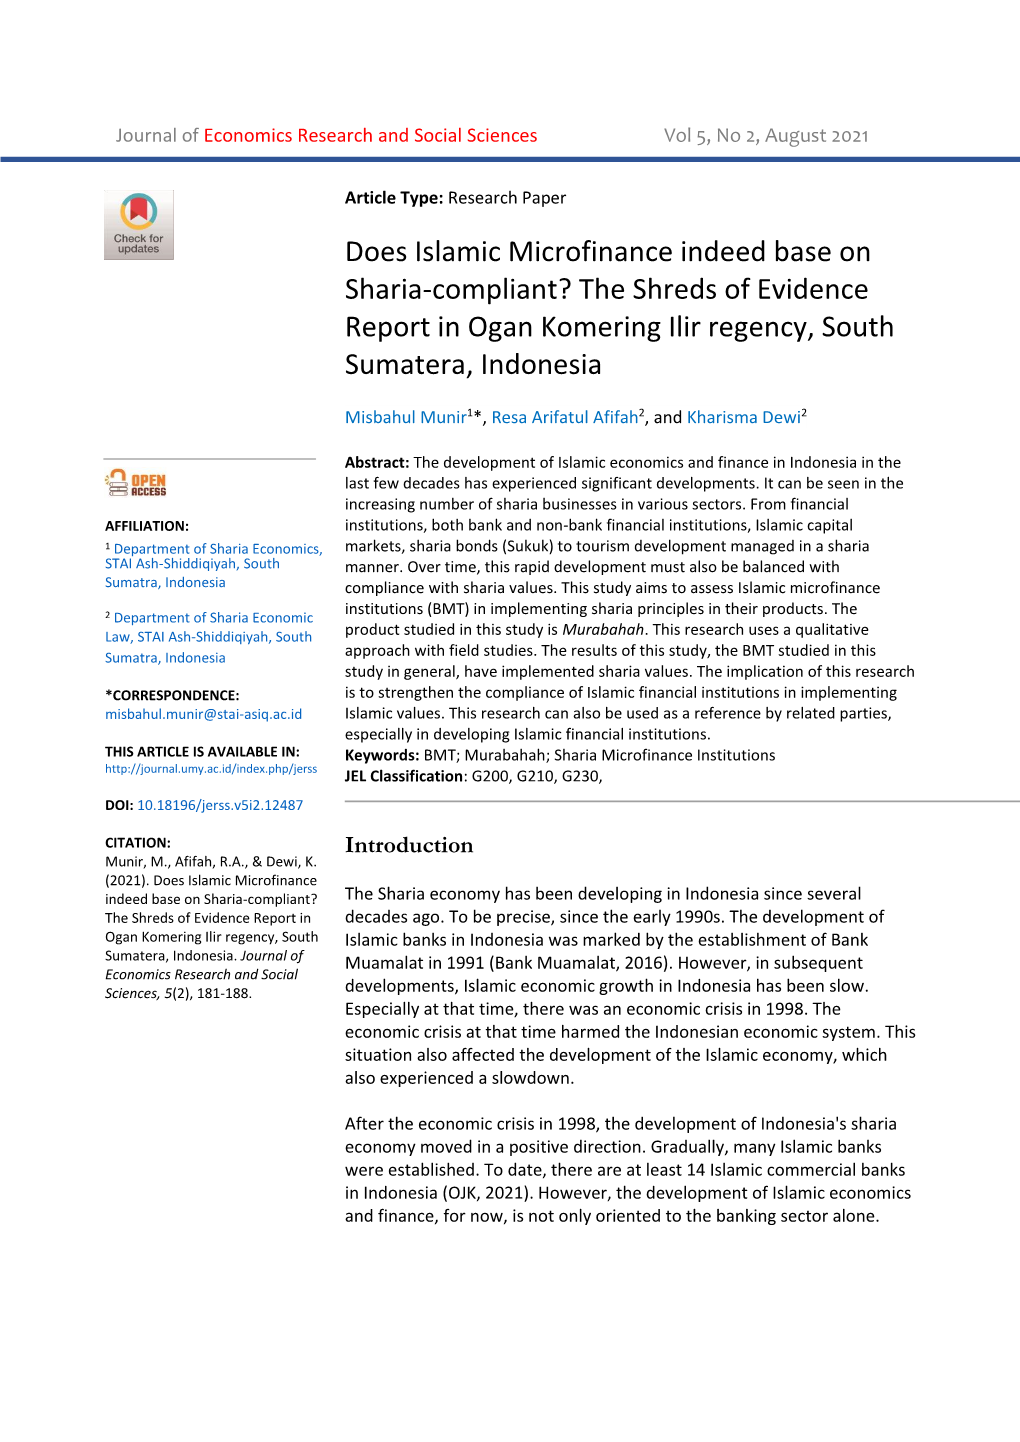 Does Islamic Microfinance Indeed Base on Sharia-Compliant? the Shreds of Evidence Report in Ogan Komering Ilir Regency, South Sumatera, Indonesia